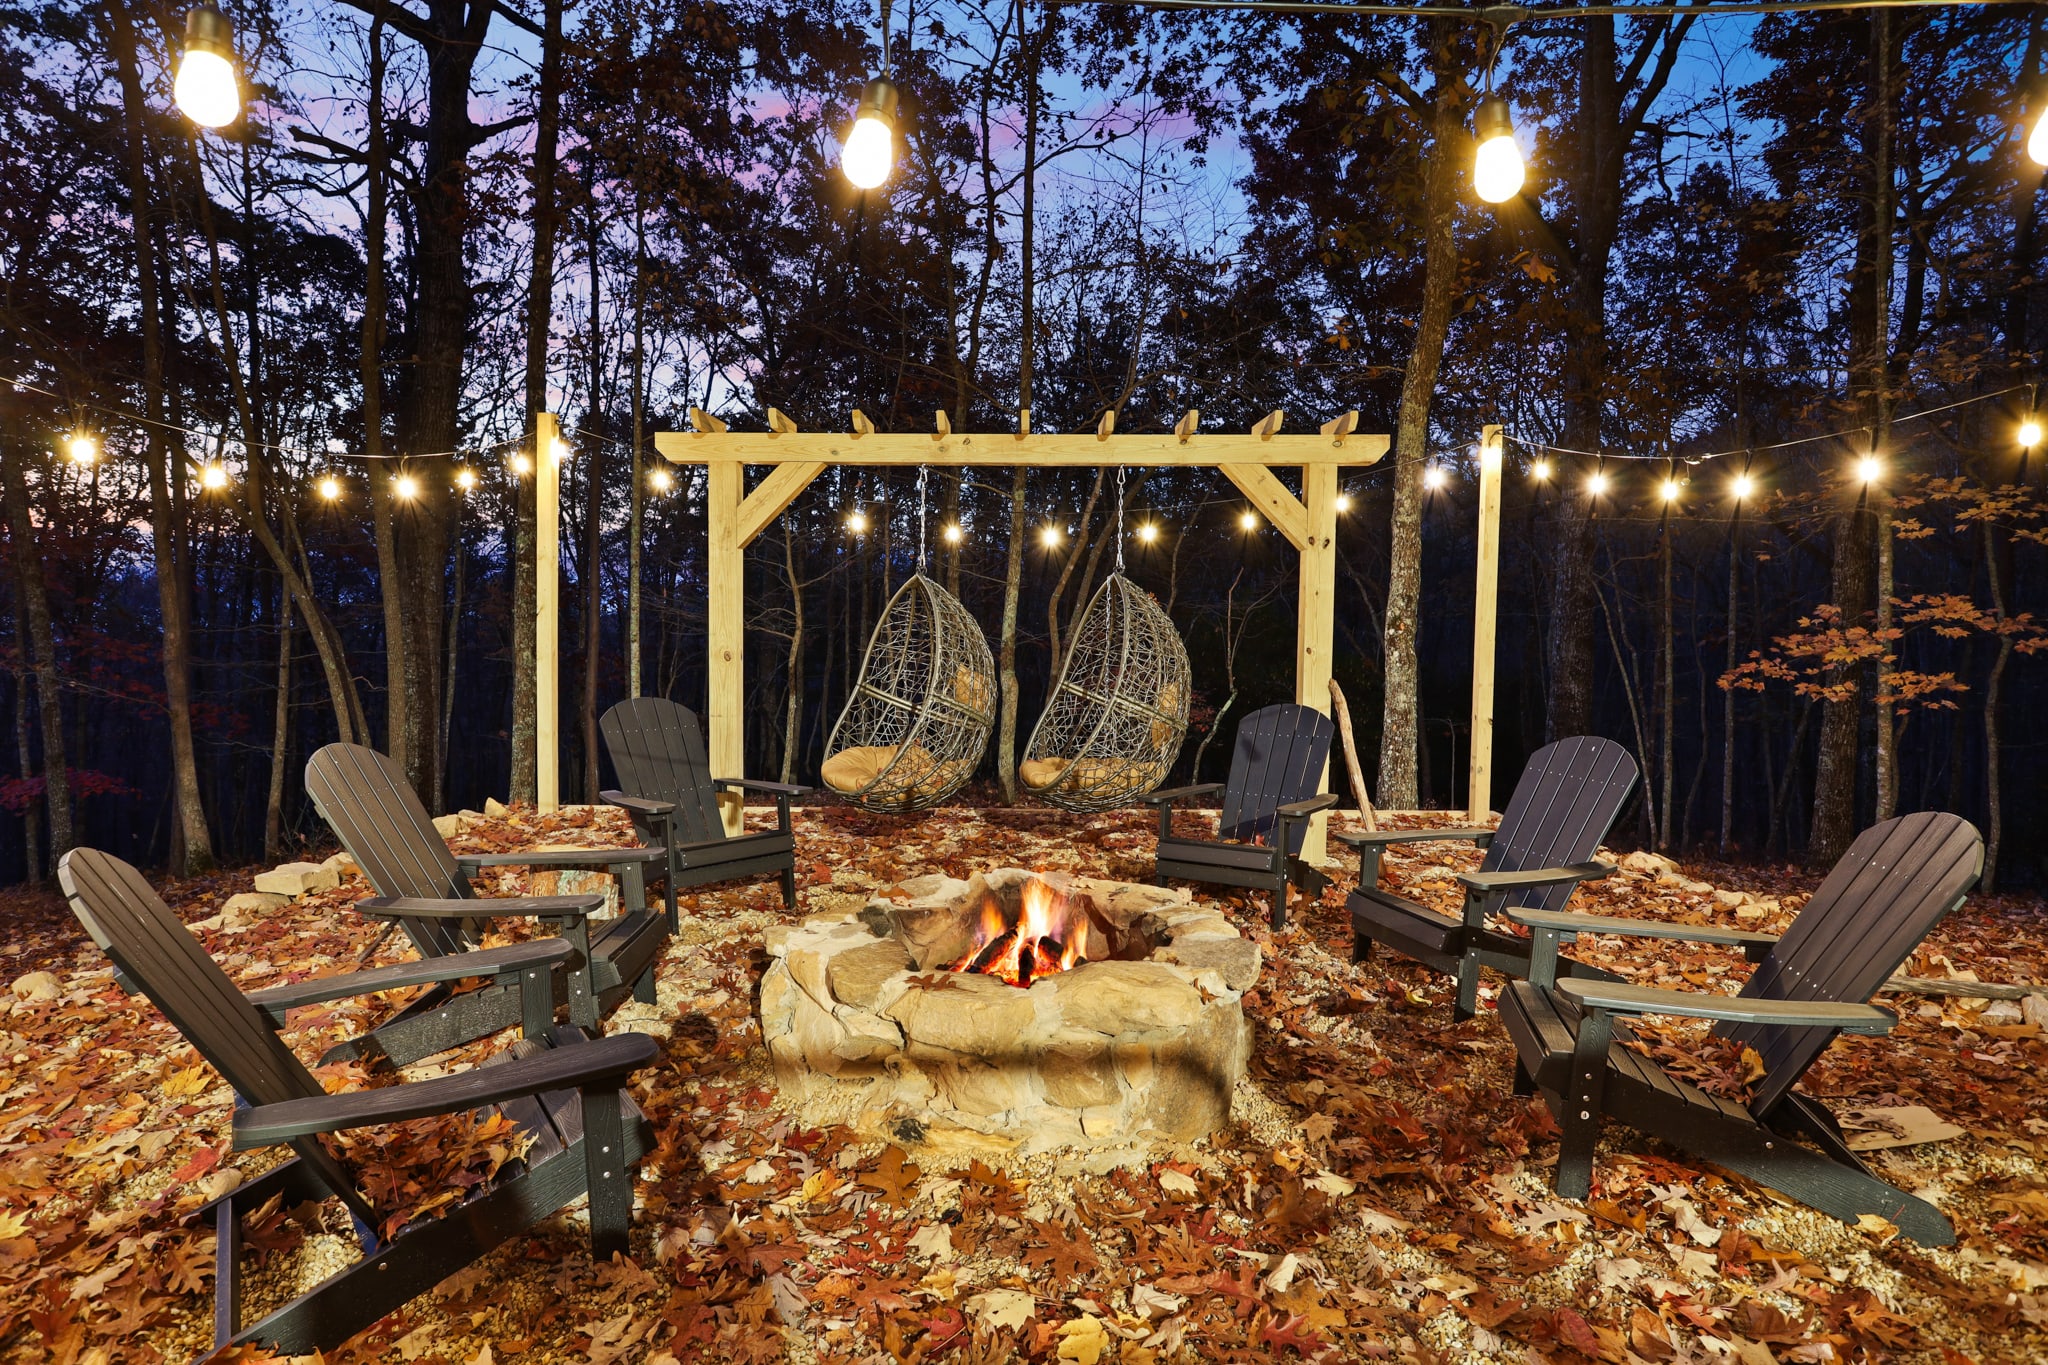 Cozy up by the fire!